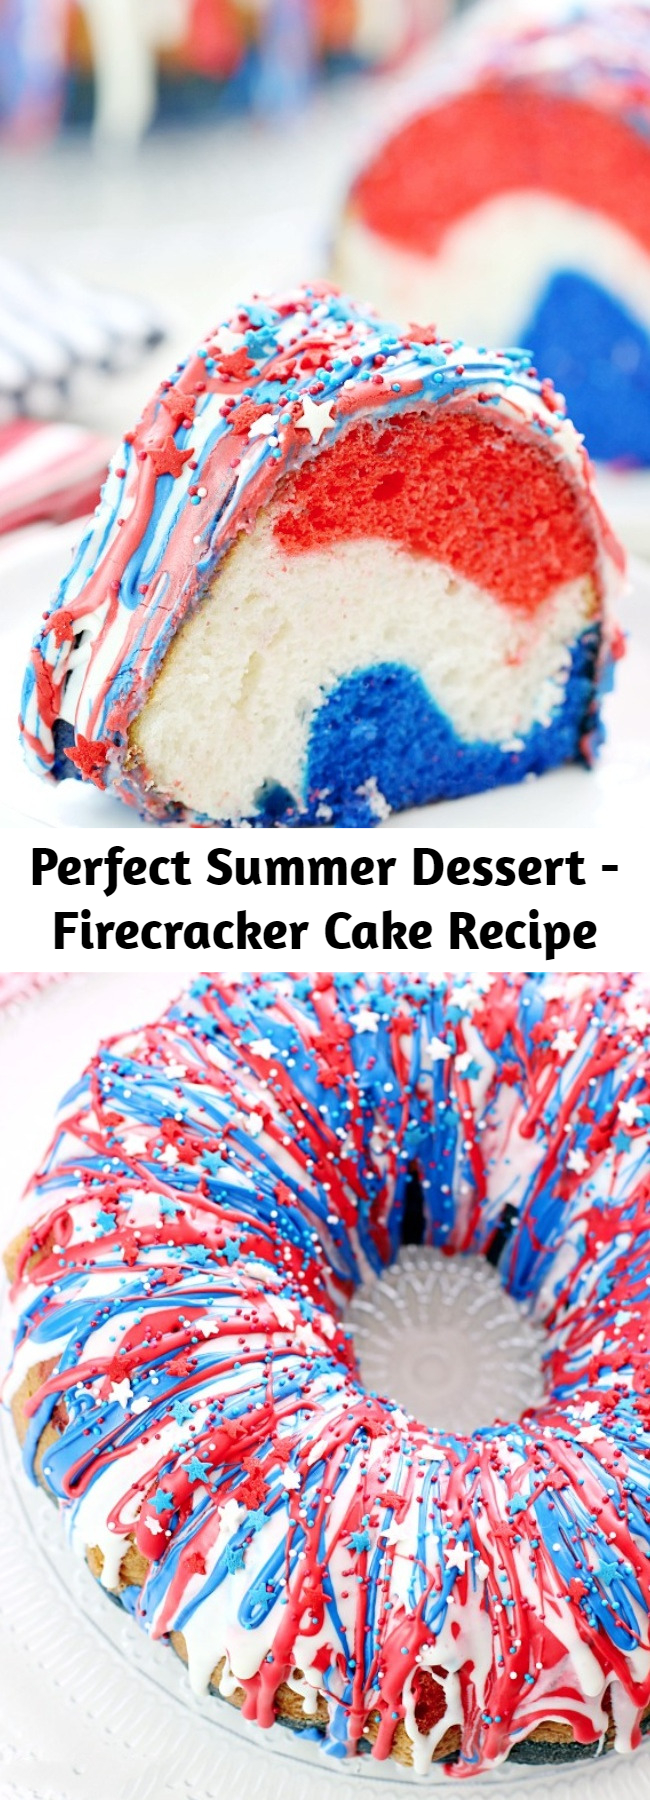 Perfect Summer Dessert - Firecracker Cake Recipe - Show your patriotism with this Firecracker Cake! The red, white, and blue runs inside and out!! Great for Memorial Day, the 4th of July or any occasion you want to share a little American pride!